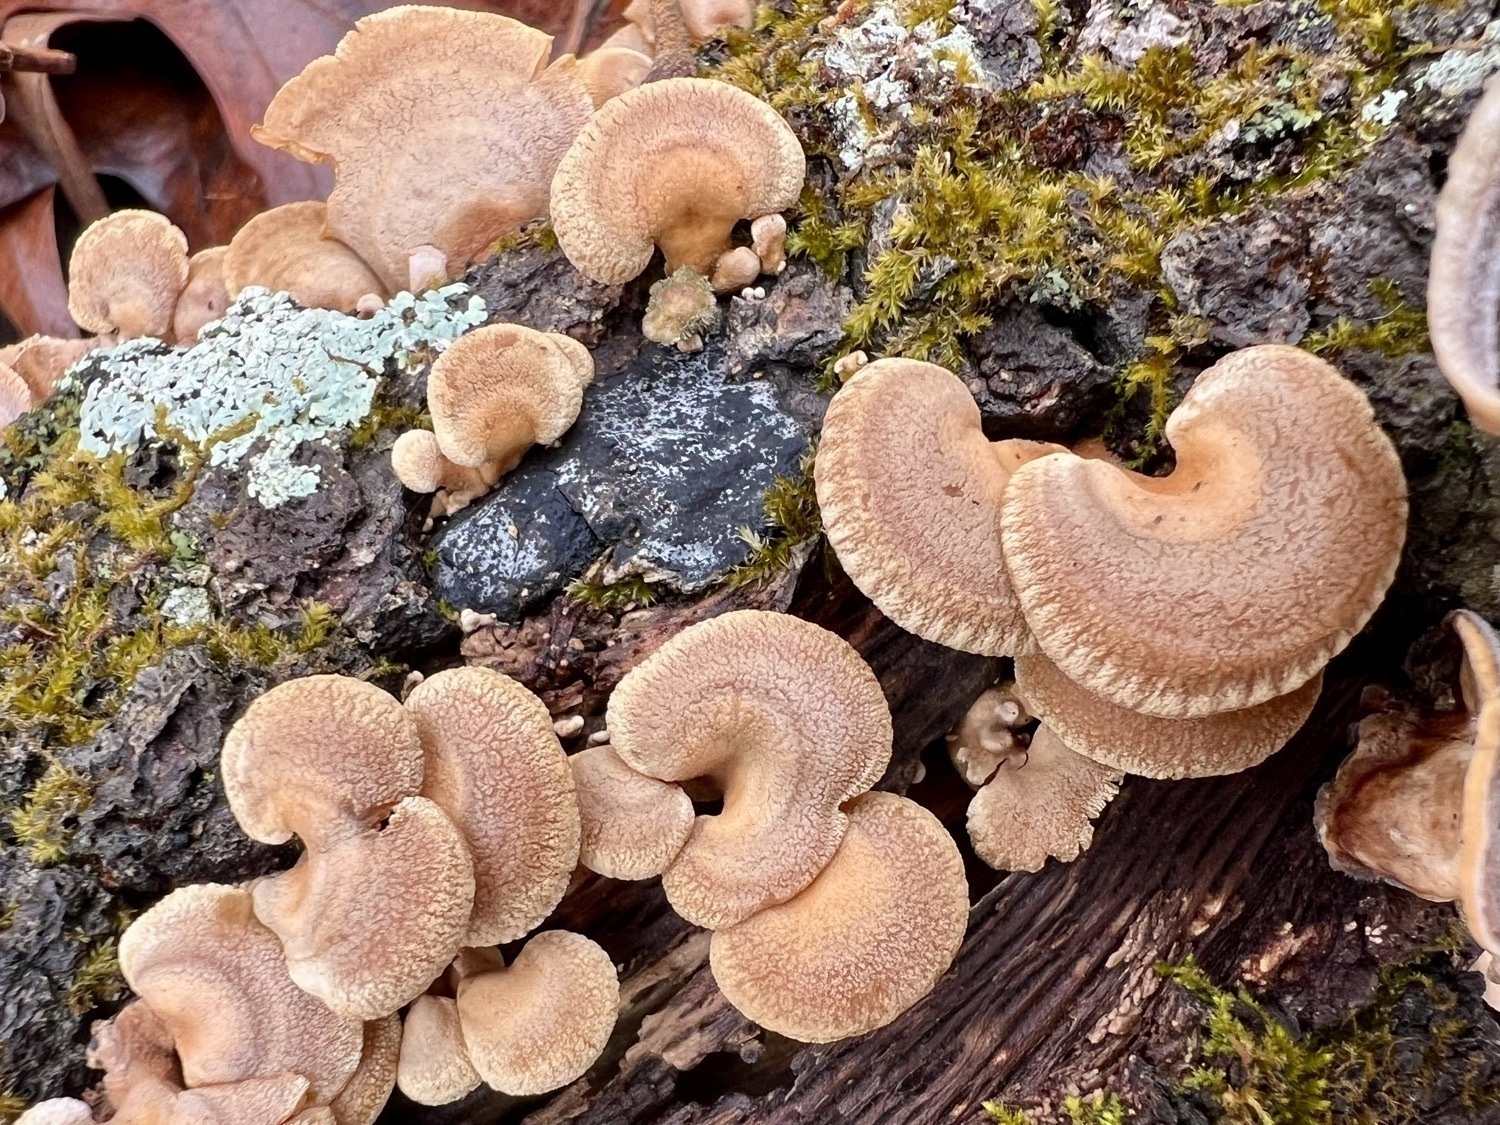 A Top down view of a cluster of Orangish cream colored mushrooms growing from a fallen tree. The mushrooms are in the shape of a Half circle and are irregular in texture and variations of color. In the background green moss, lichen and more mushrooms are visible.